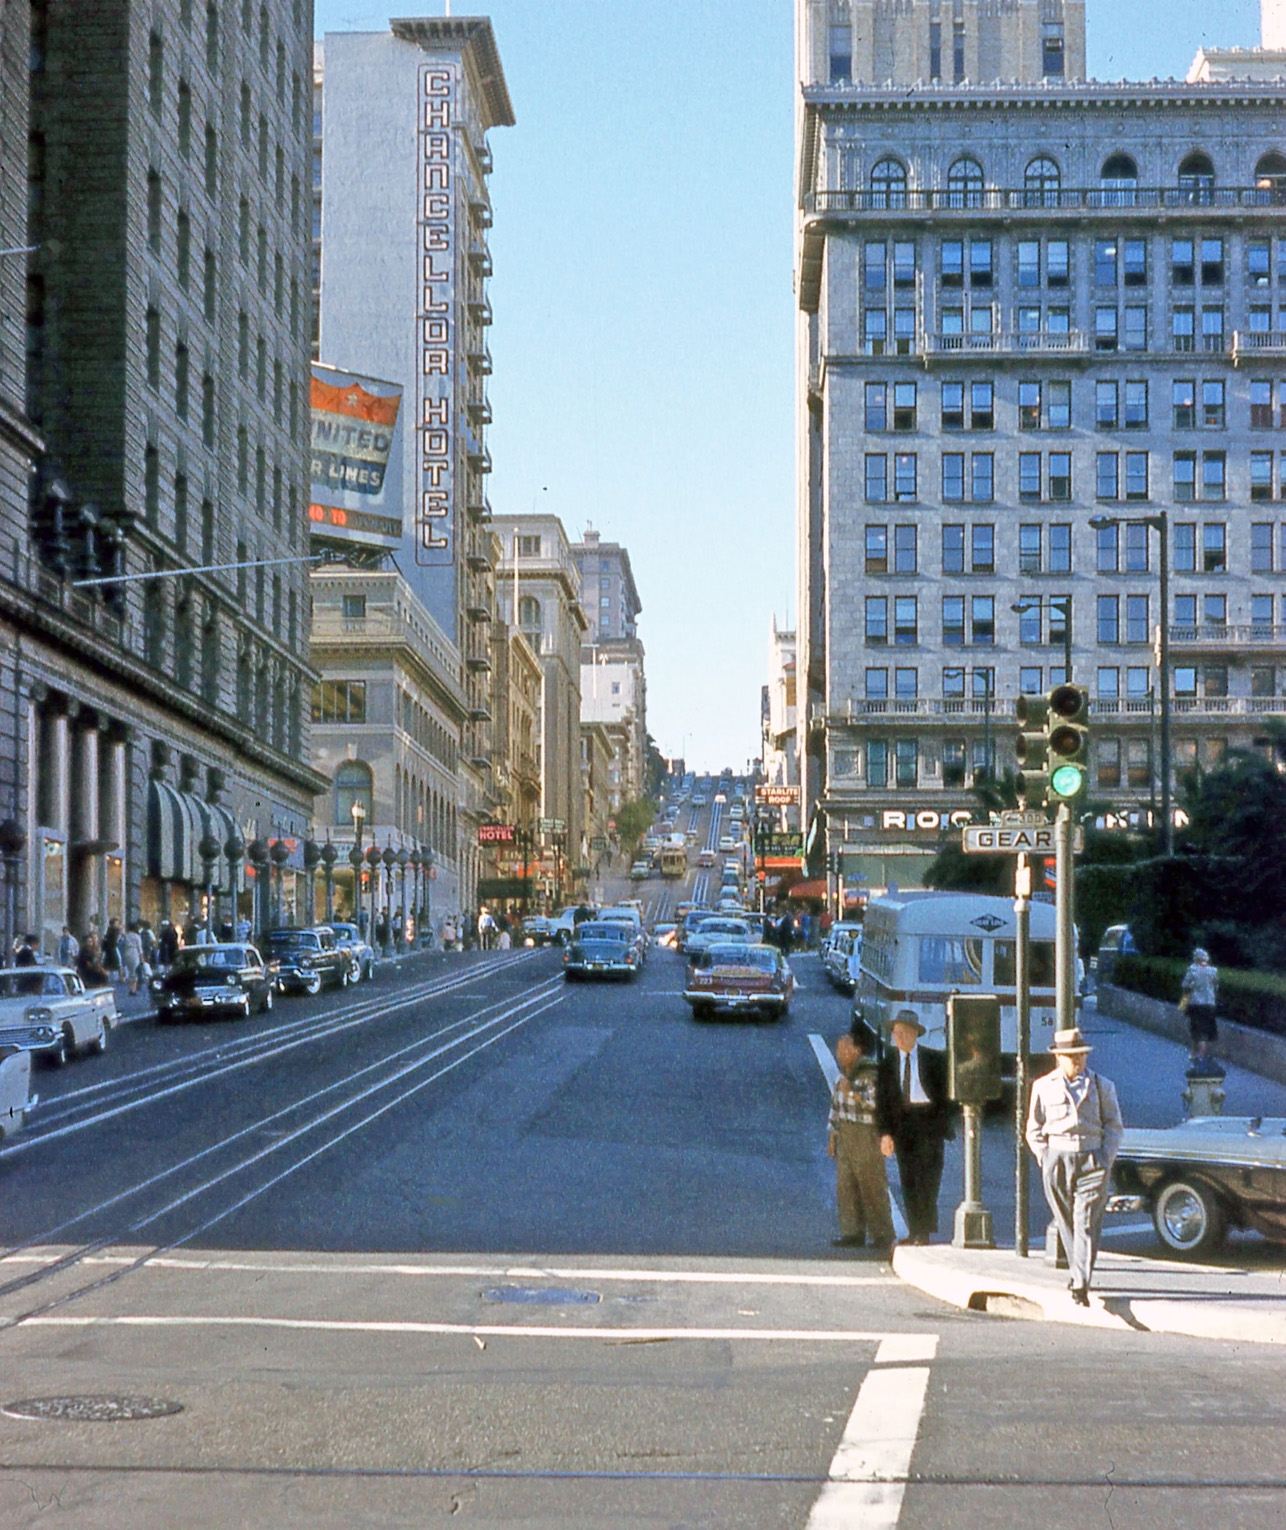 Powell at Geary, San Francisco; Union Square just off to the right. From a color slide by my father. View full size.